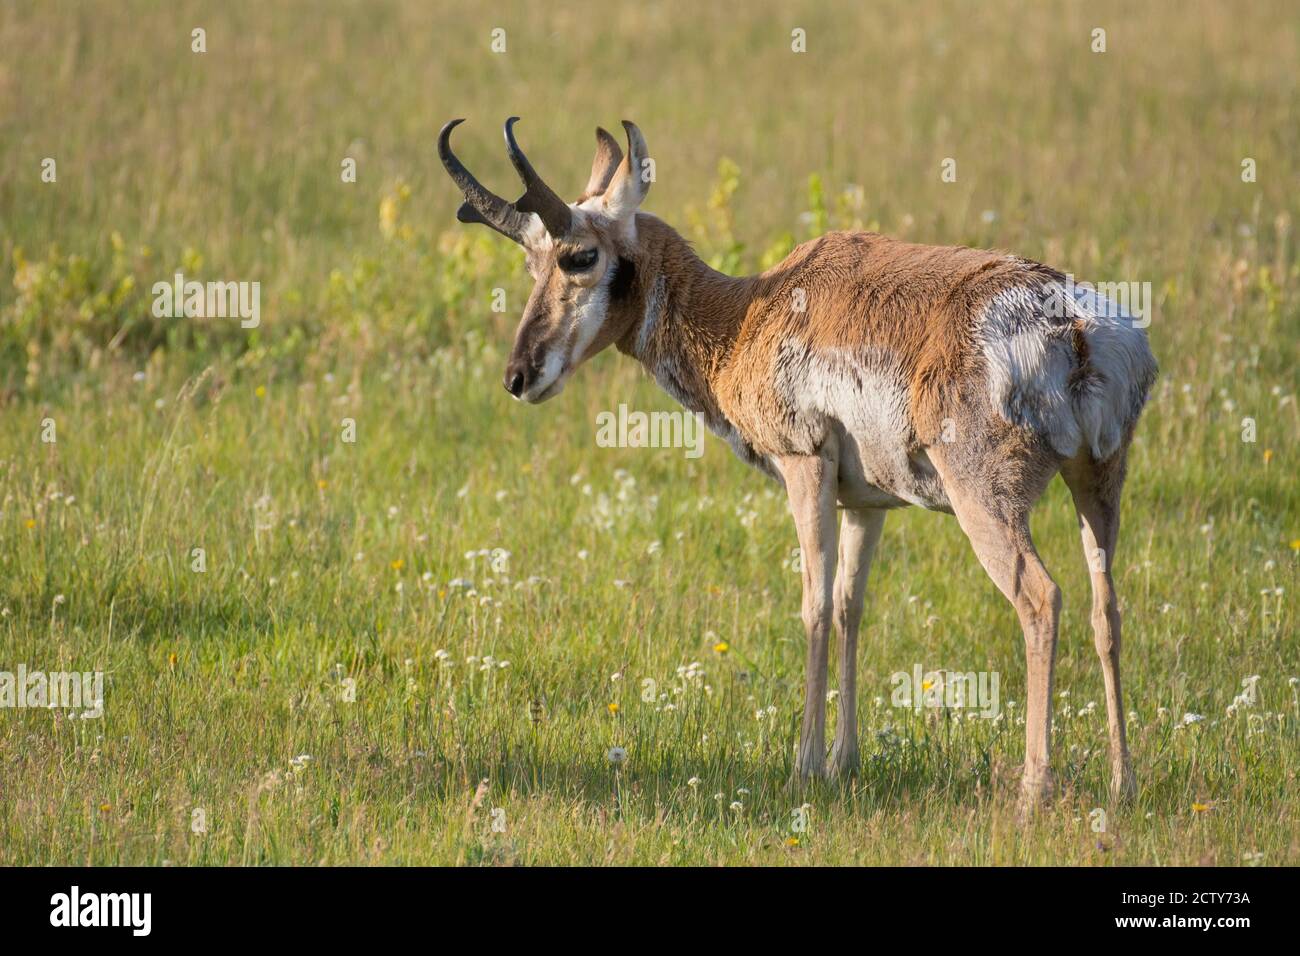 Pronghorn buck with partially shed winter coat; Yellowstone National Park, Wyoming. Stock Photo